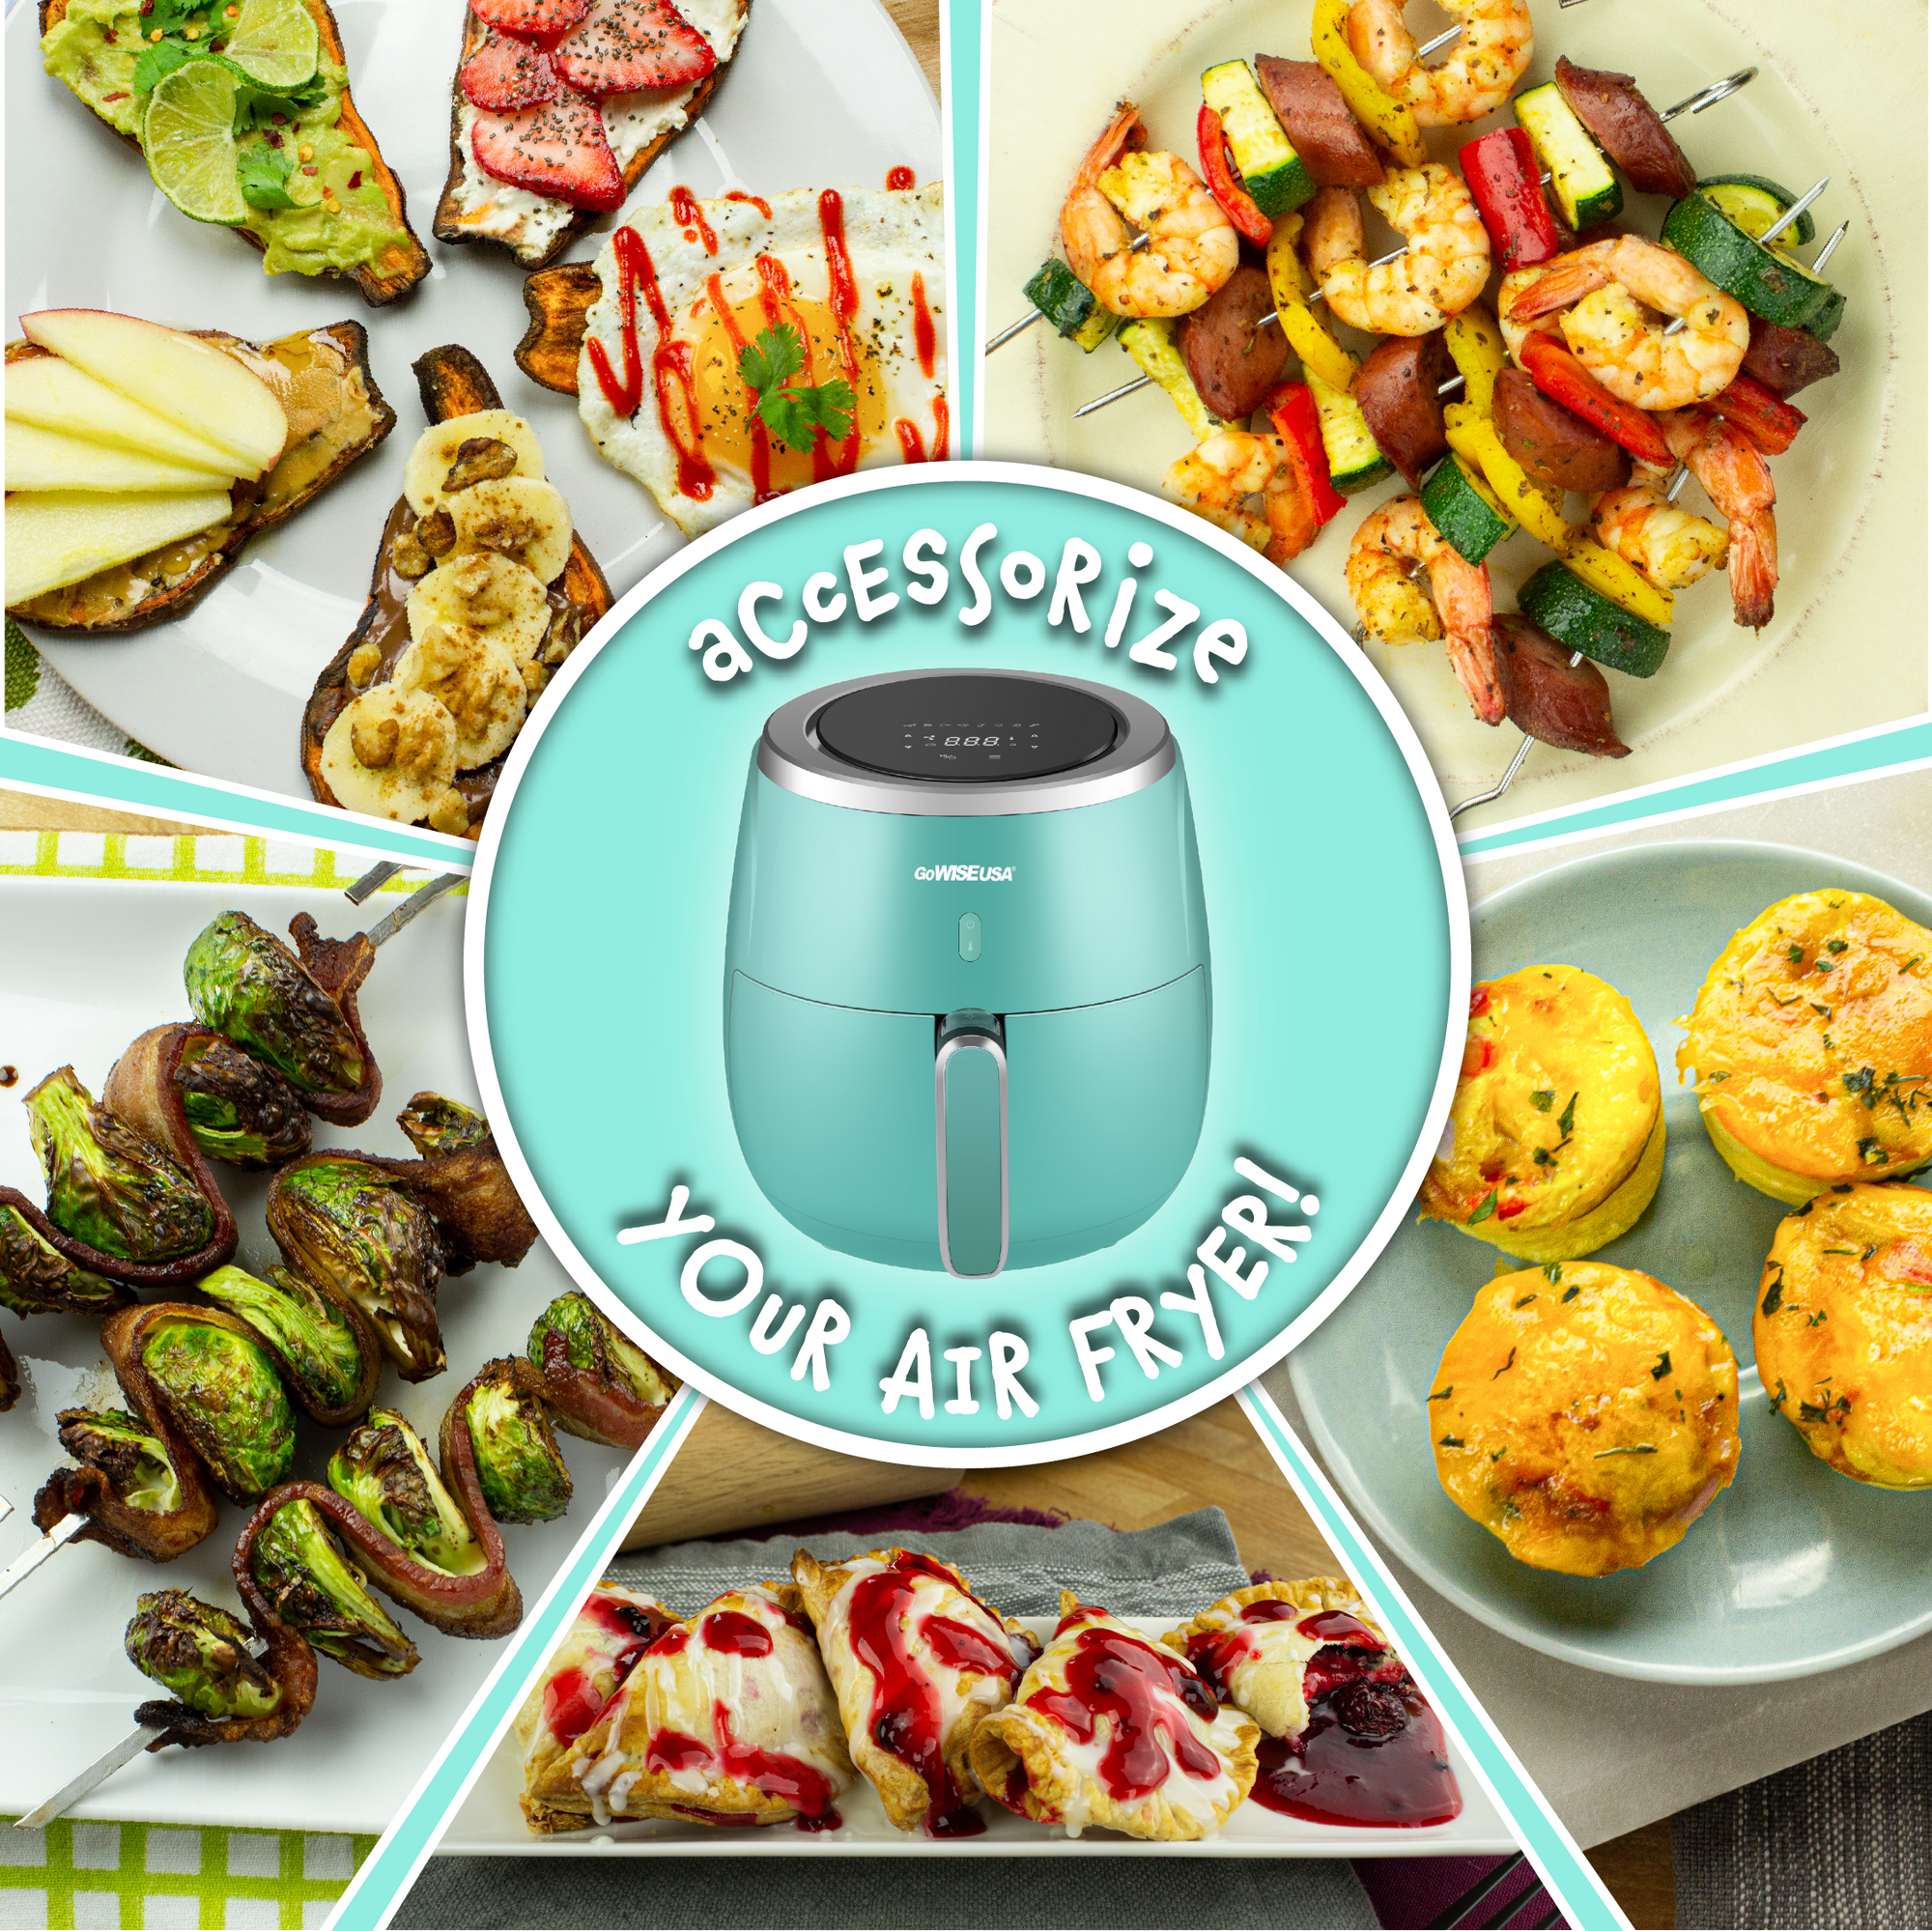 Accessorize your Air Fryer!